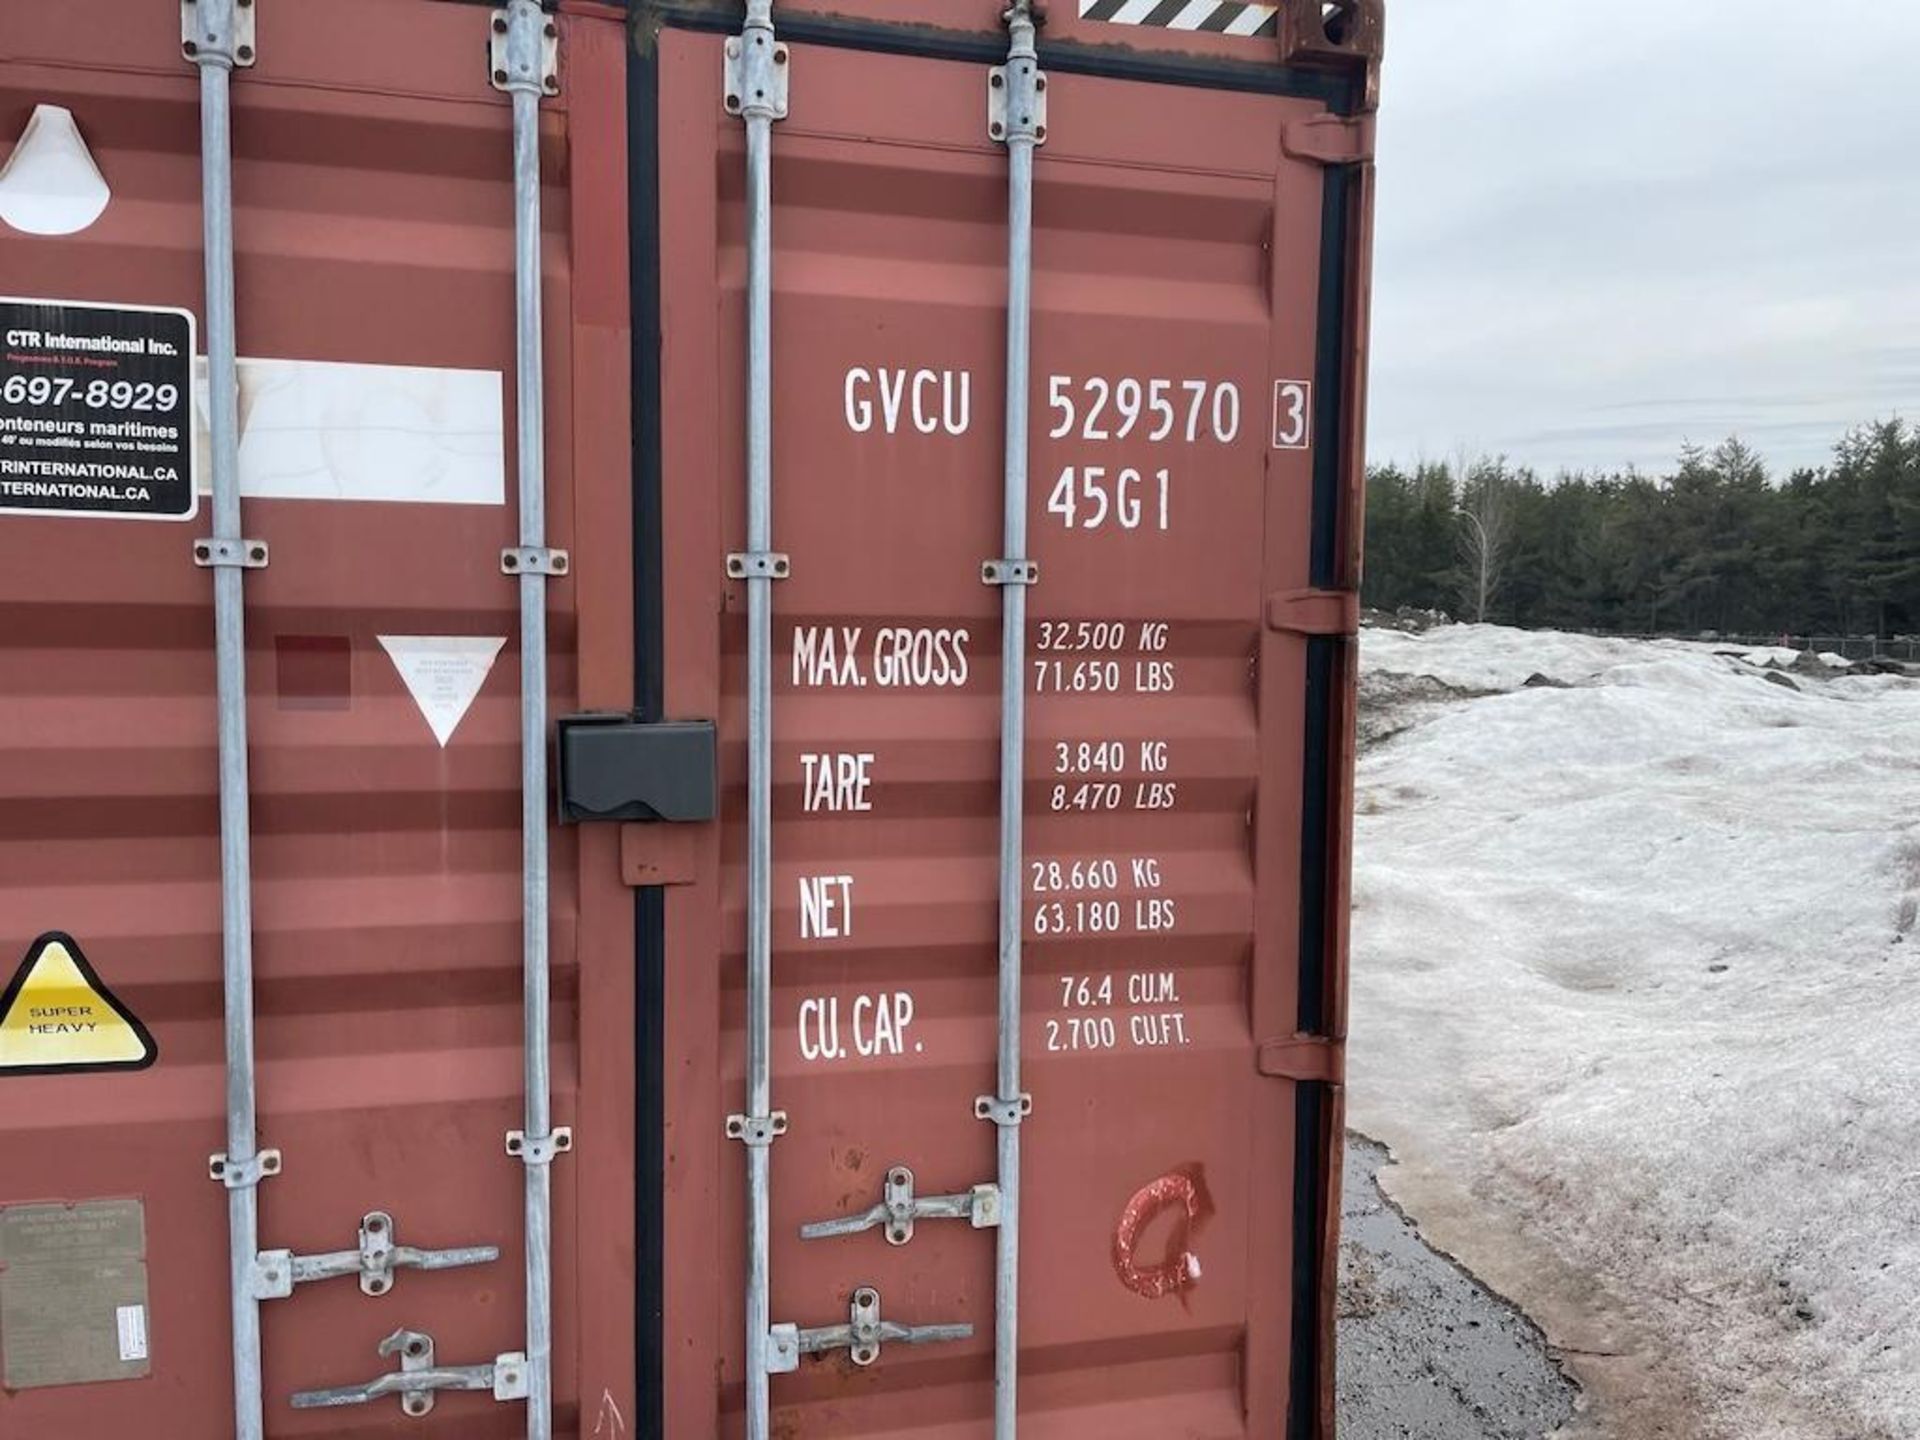 40 FT SEA CONTAINER, EXCLUDING CONTENTS, DELAYED PICK UP UNTIL MAY 13 [1] [TROIS RIVIERES] *PLEASE N - Image 4 of 4